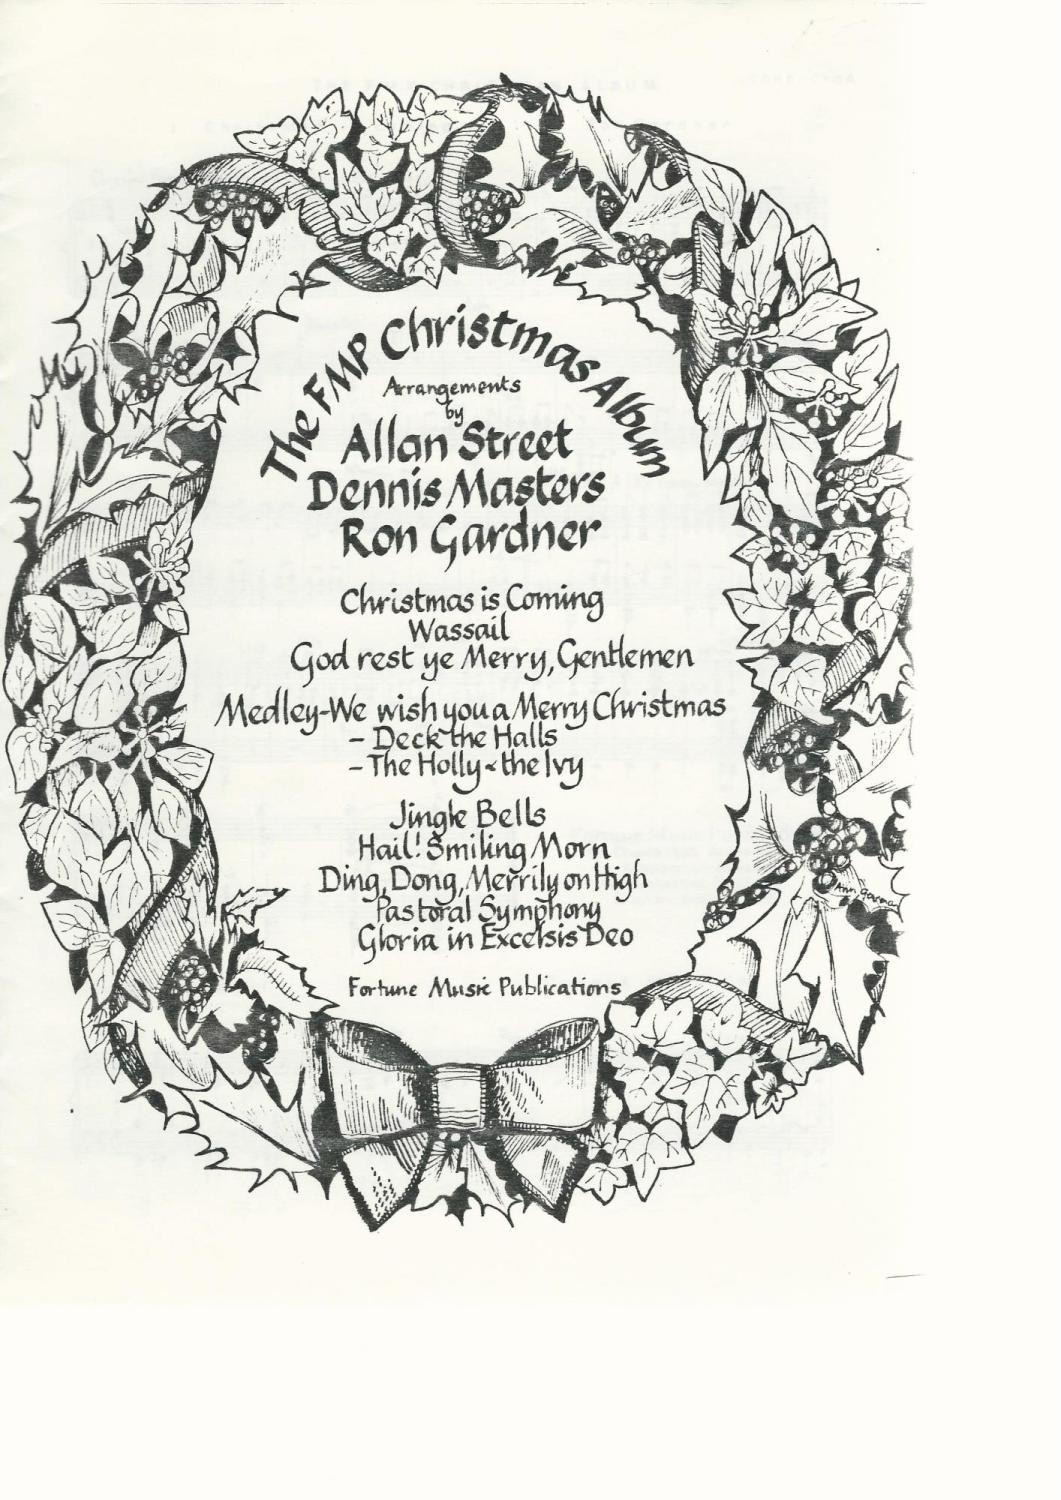 The FMP Christmas Album for Brass Band - arr. Allan Street, Dennis Masters,